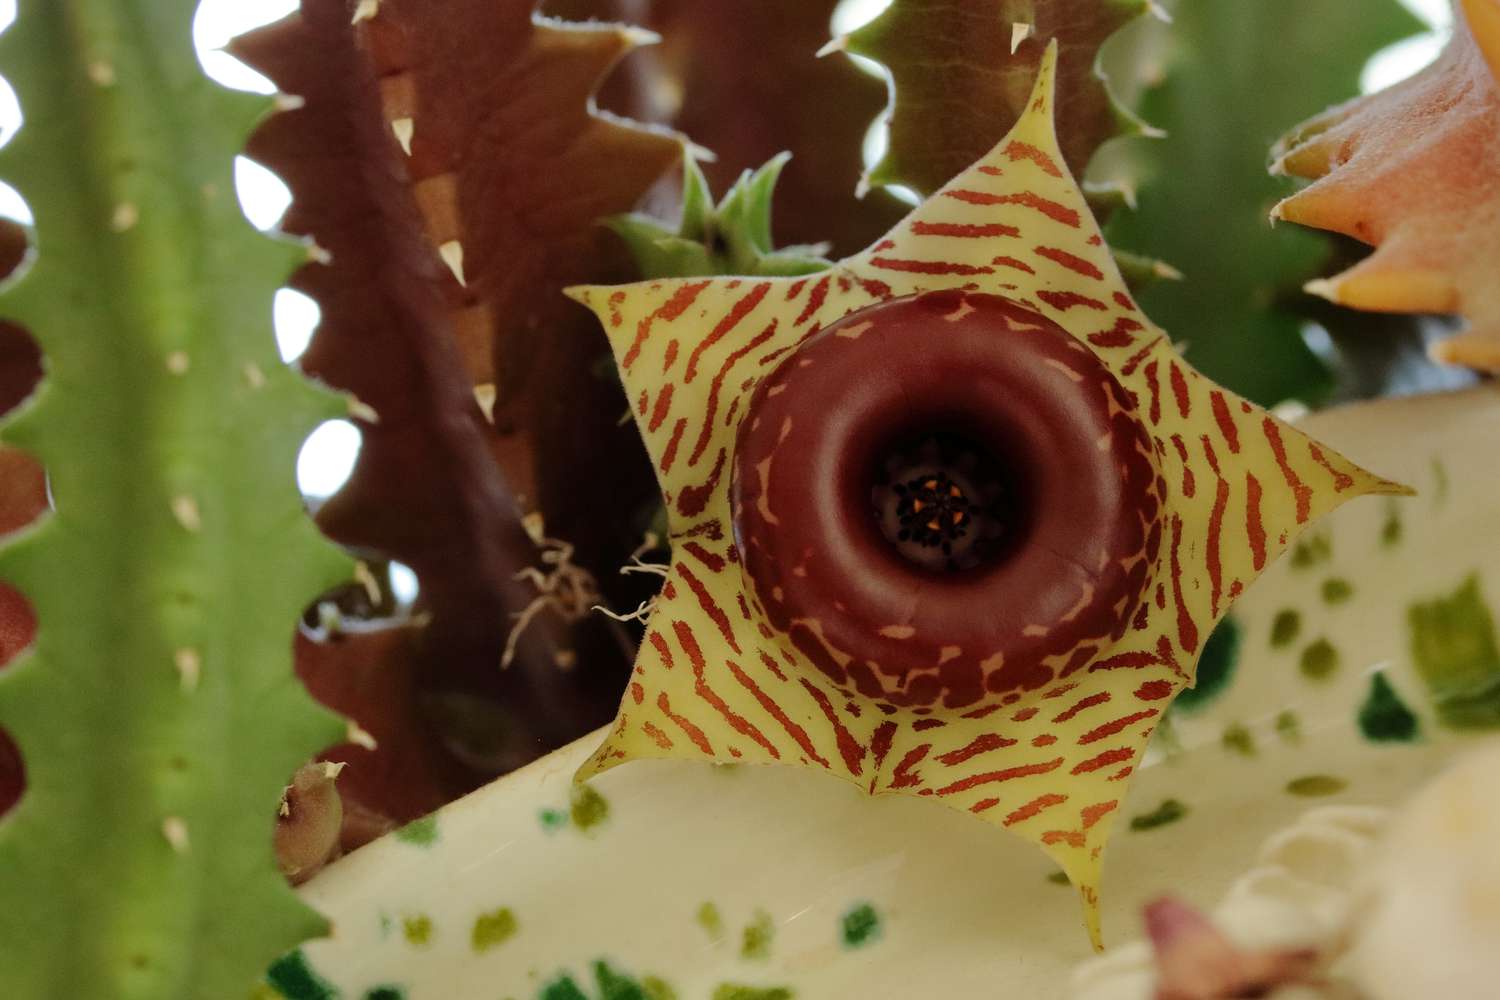 The stems of Huernia zebrina change to red under stronger light exposure